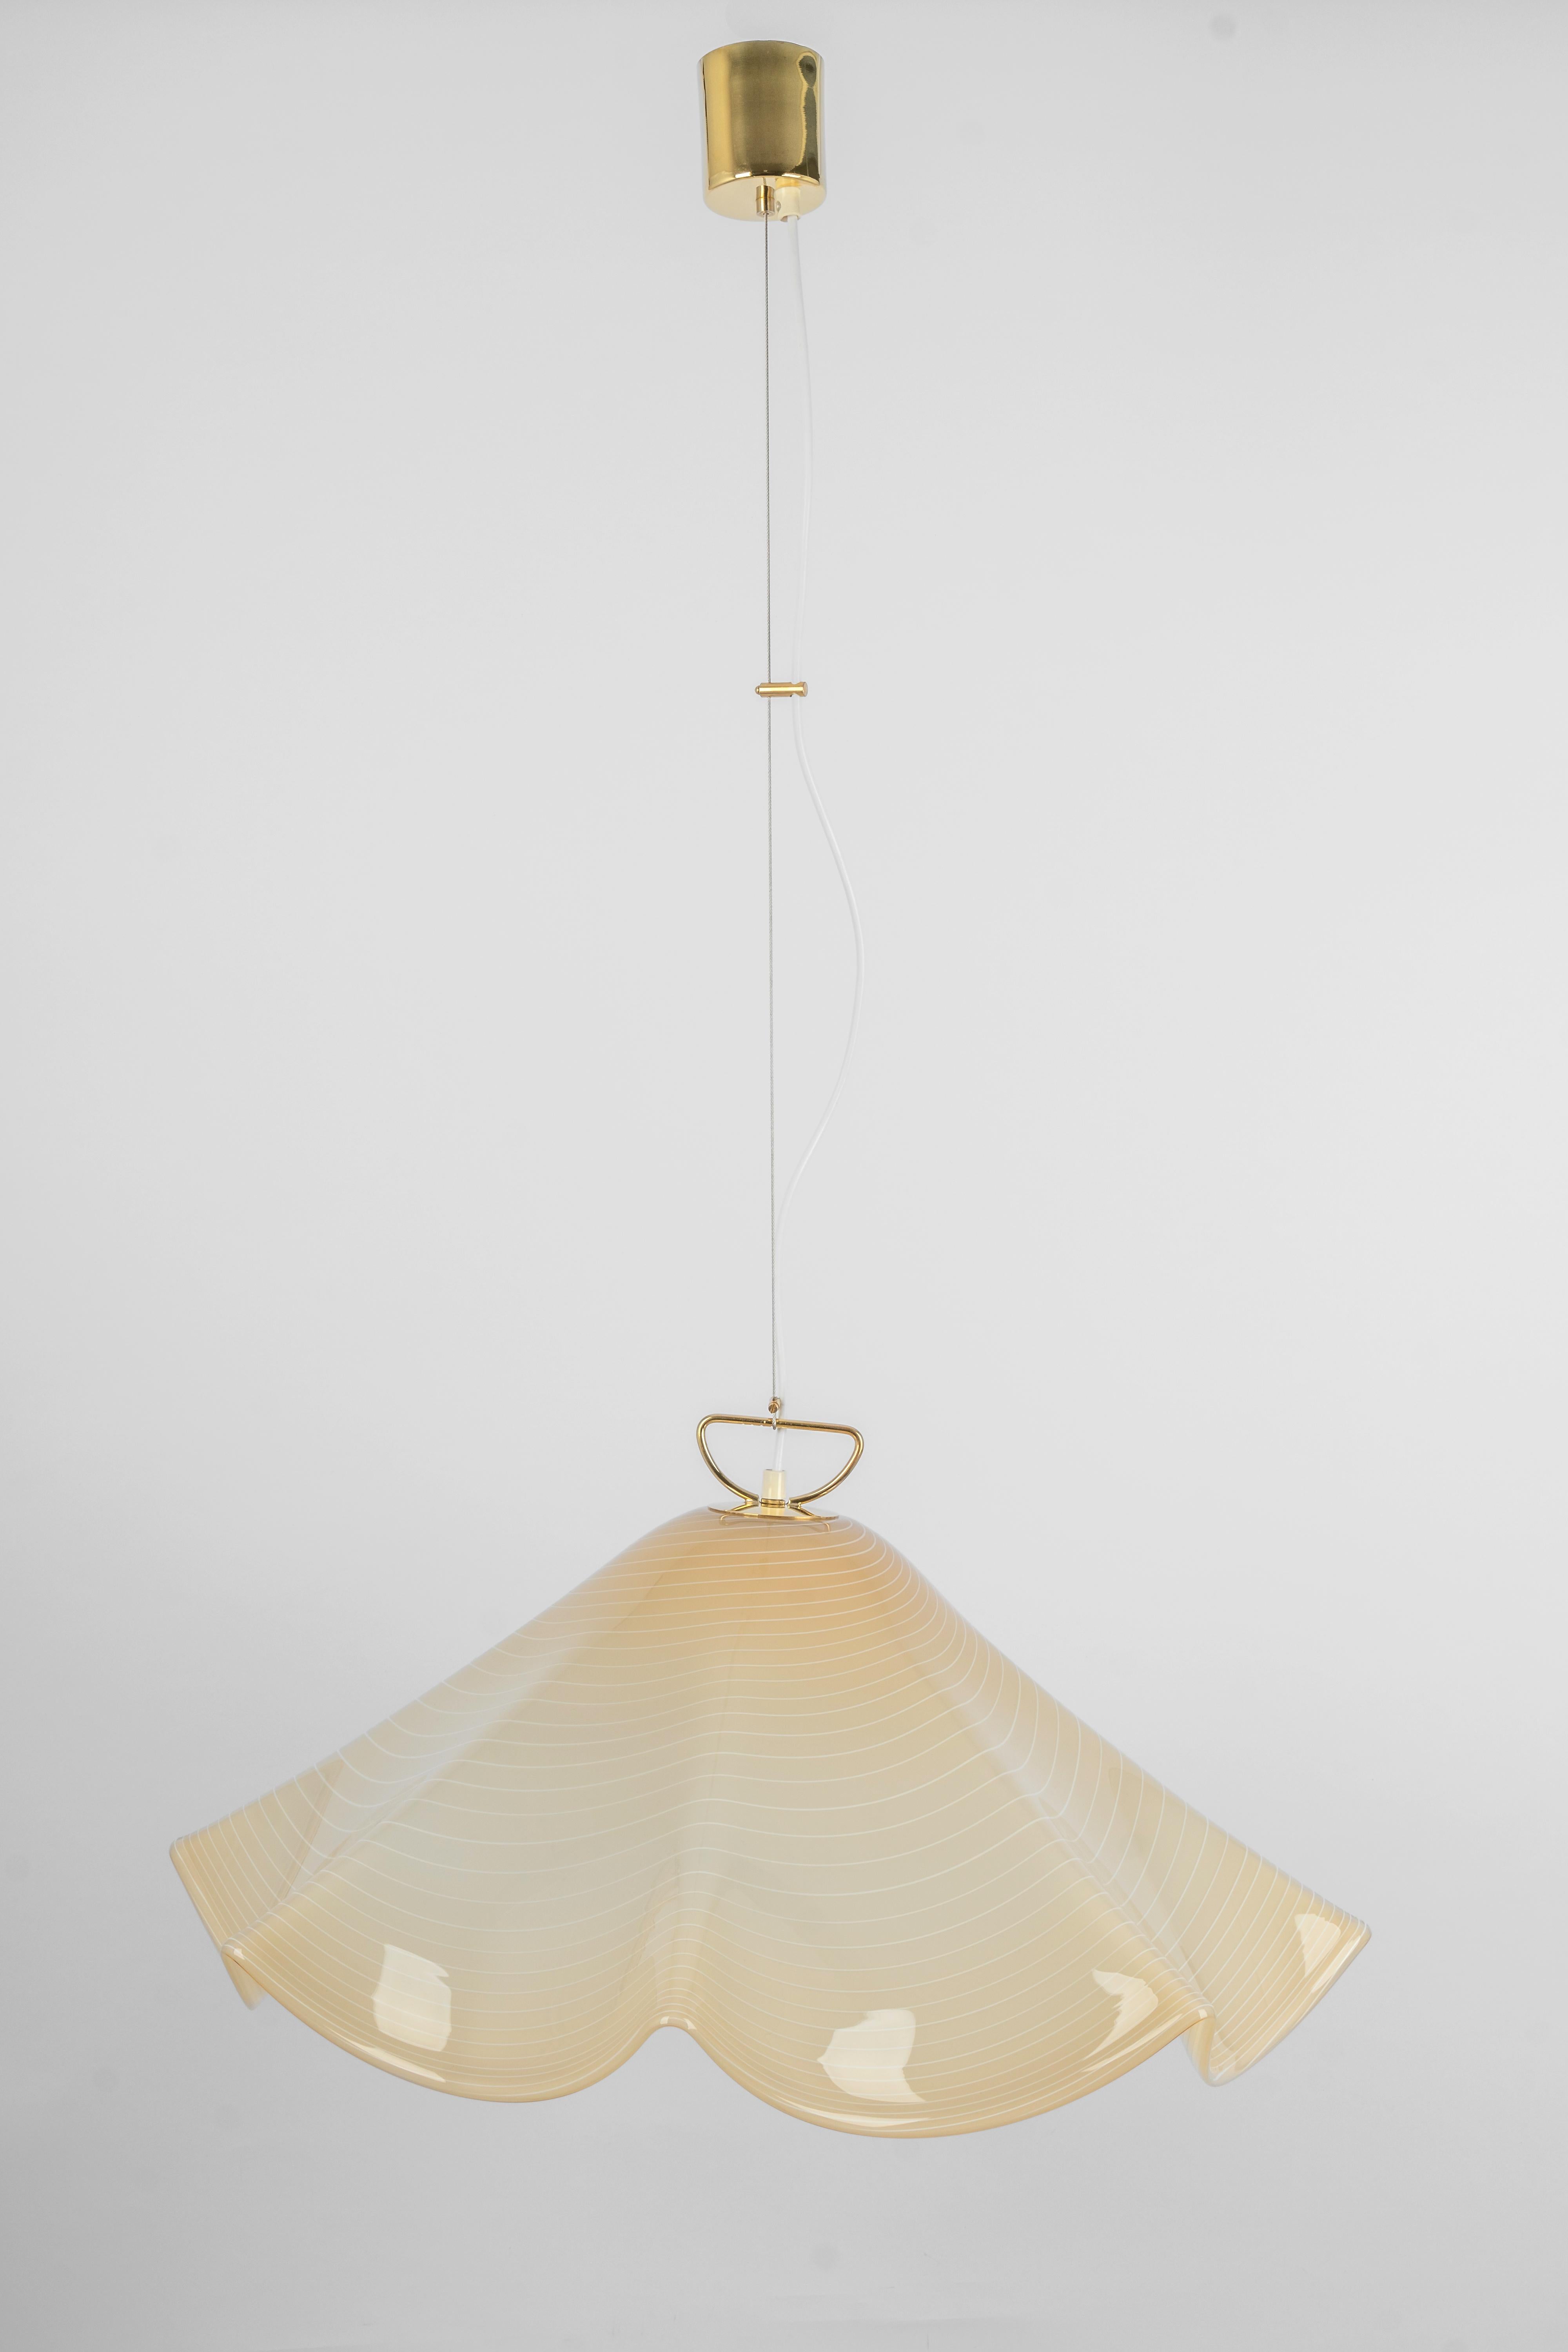 Stunning glass Pendant light by Kalmar  made in the 1970s
Nice structured glass, beautifully refracting the light.
High quality and in very good condition. Cleaned, well-wired and ready to use.
The fixture requires 1 x E27 standard bulb.
Light bulbs